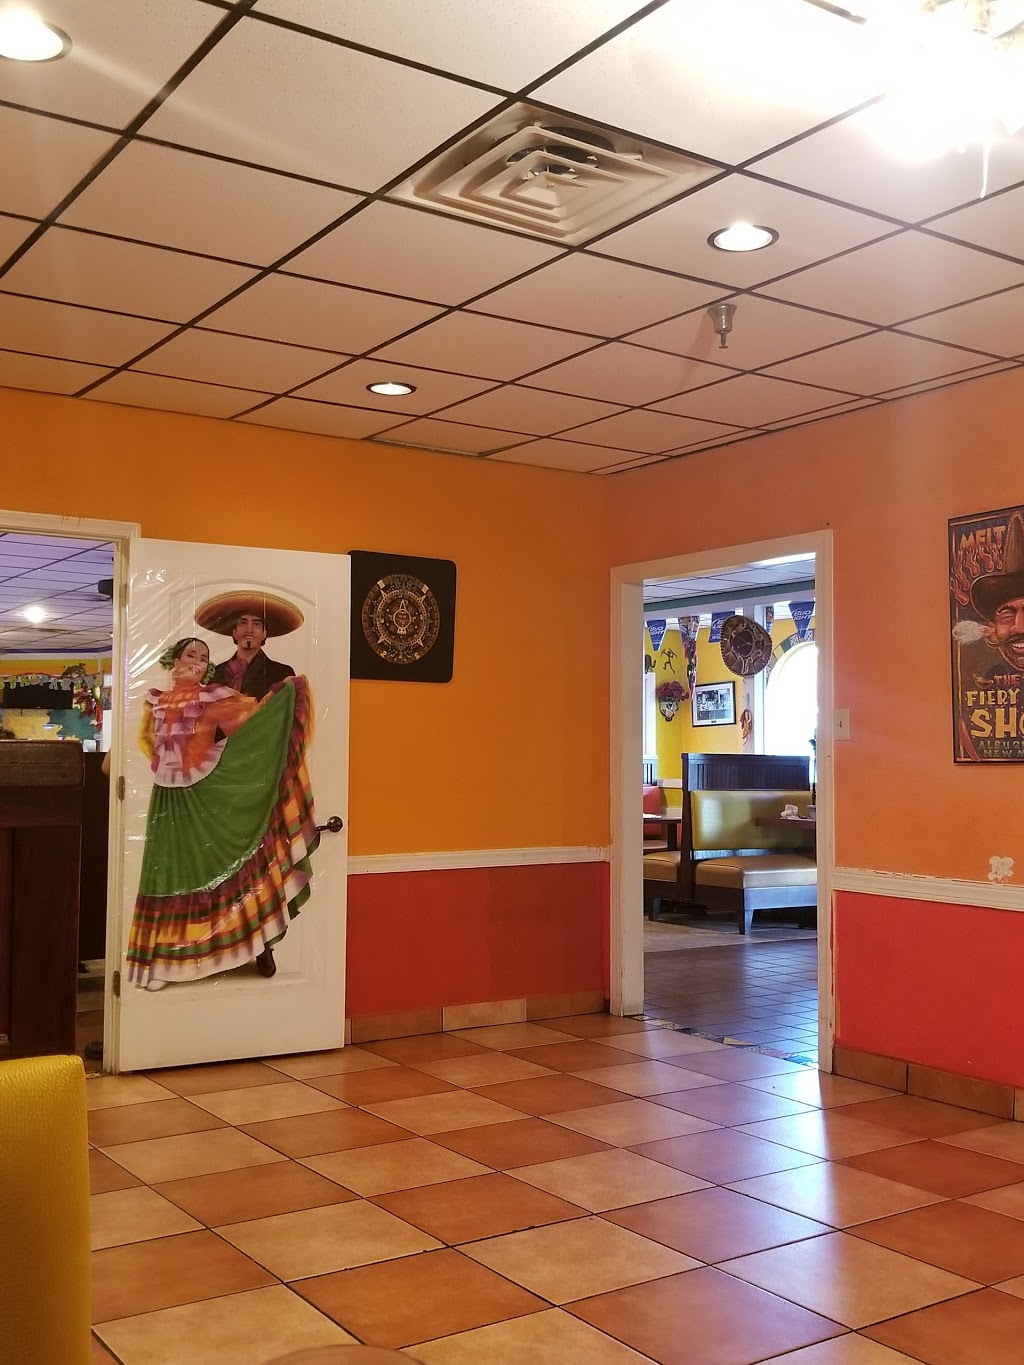 Agave Mexican Bar & Grill | 18 W 3rd St, Wendell, NC 27591 | Phone: (919) 365-0069